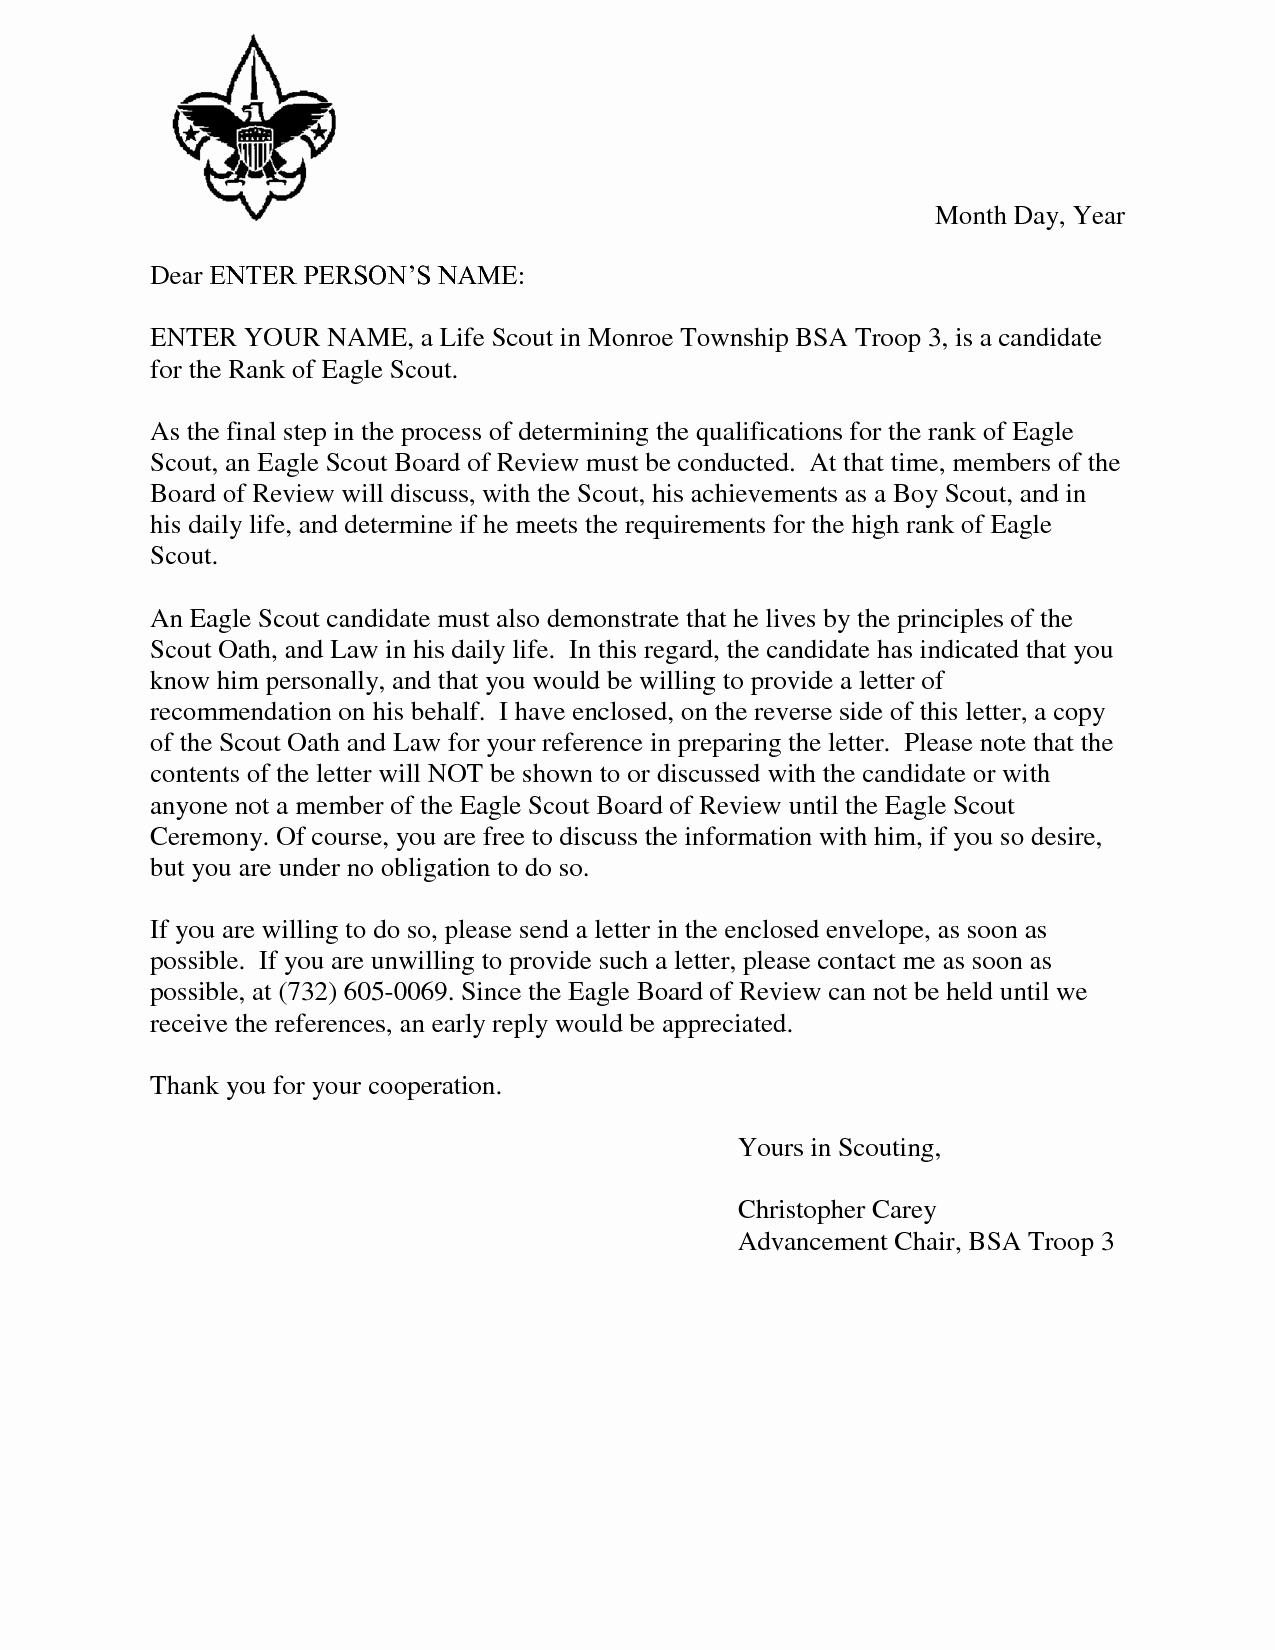 Eagle Scout Letter Of Recommendation Inspirational Eagle Scout Reference Request Sample Letter Doc 7 by